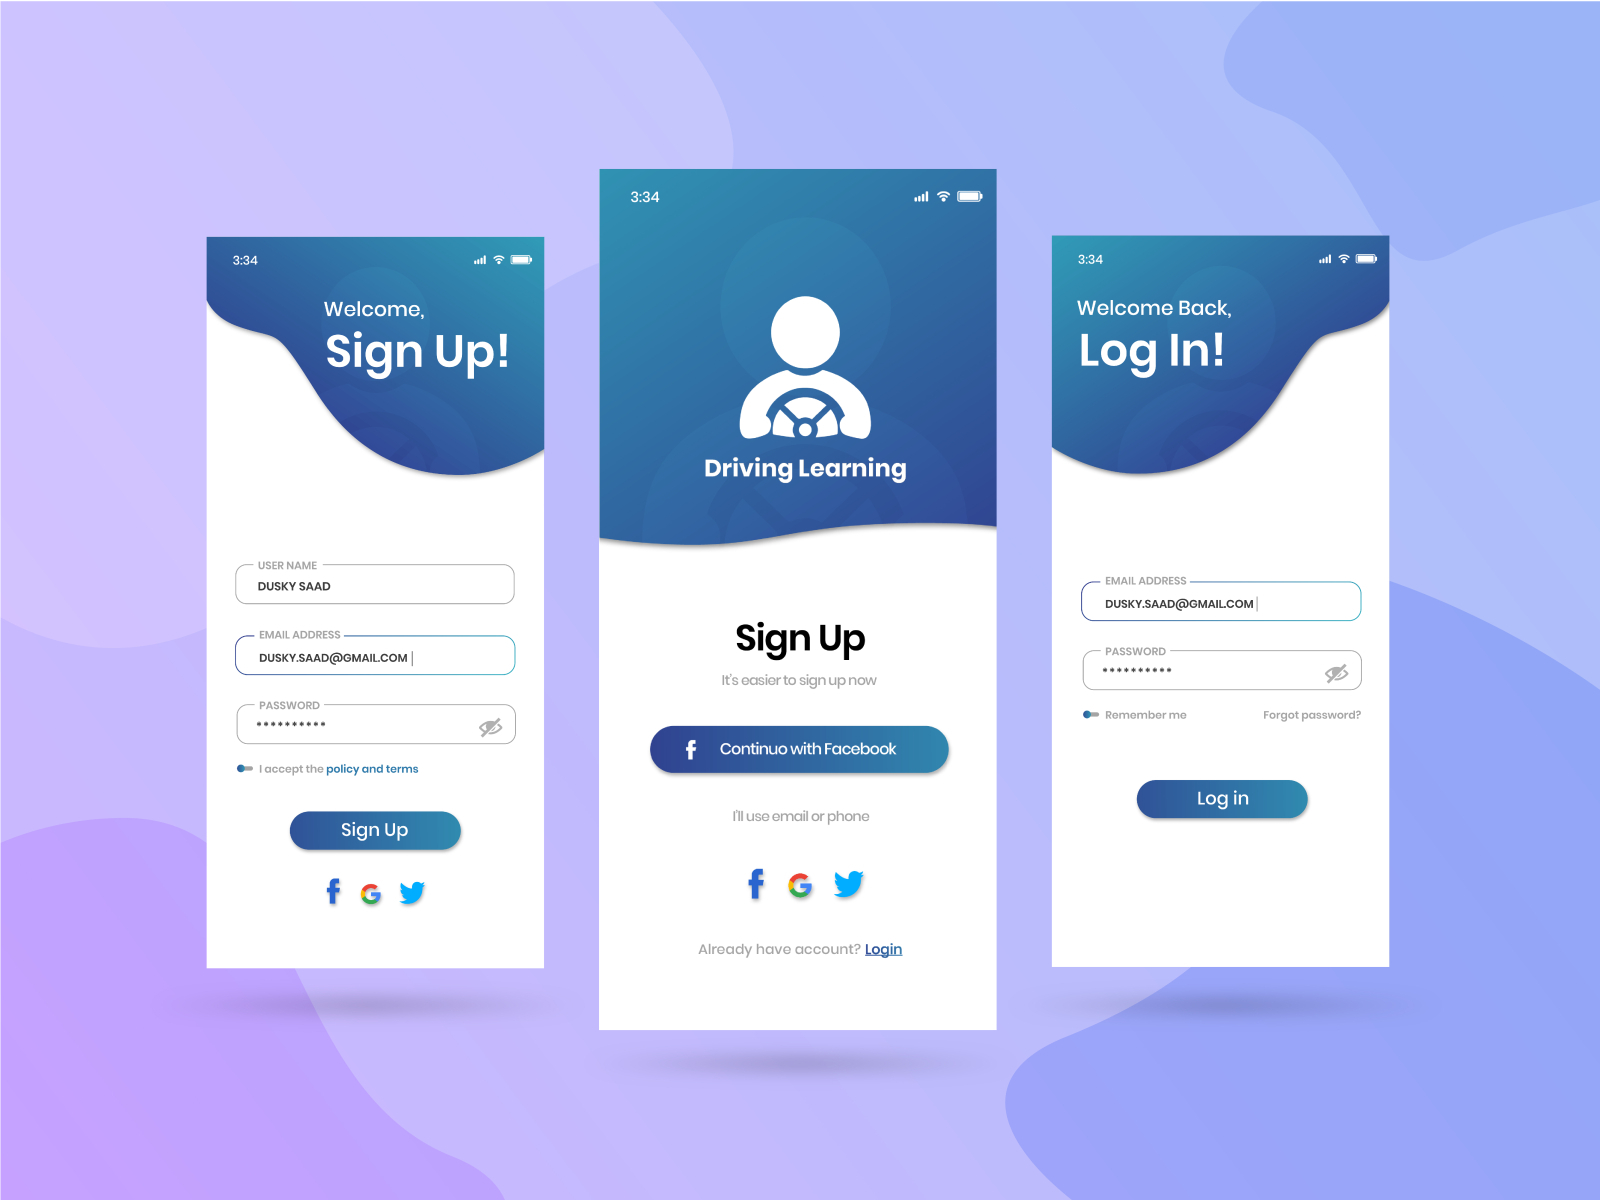 sign up and login UI template for Android and iOS by Duski saad hrp on ...